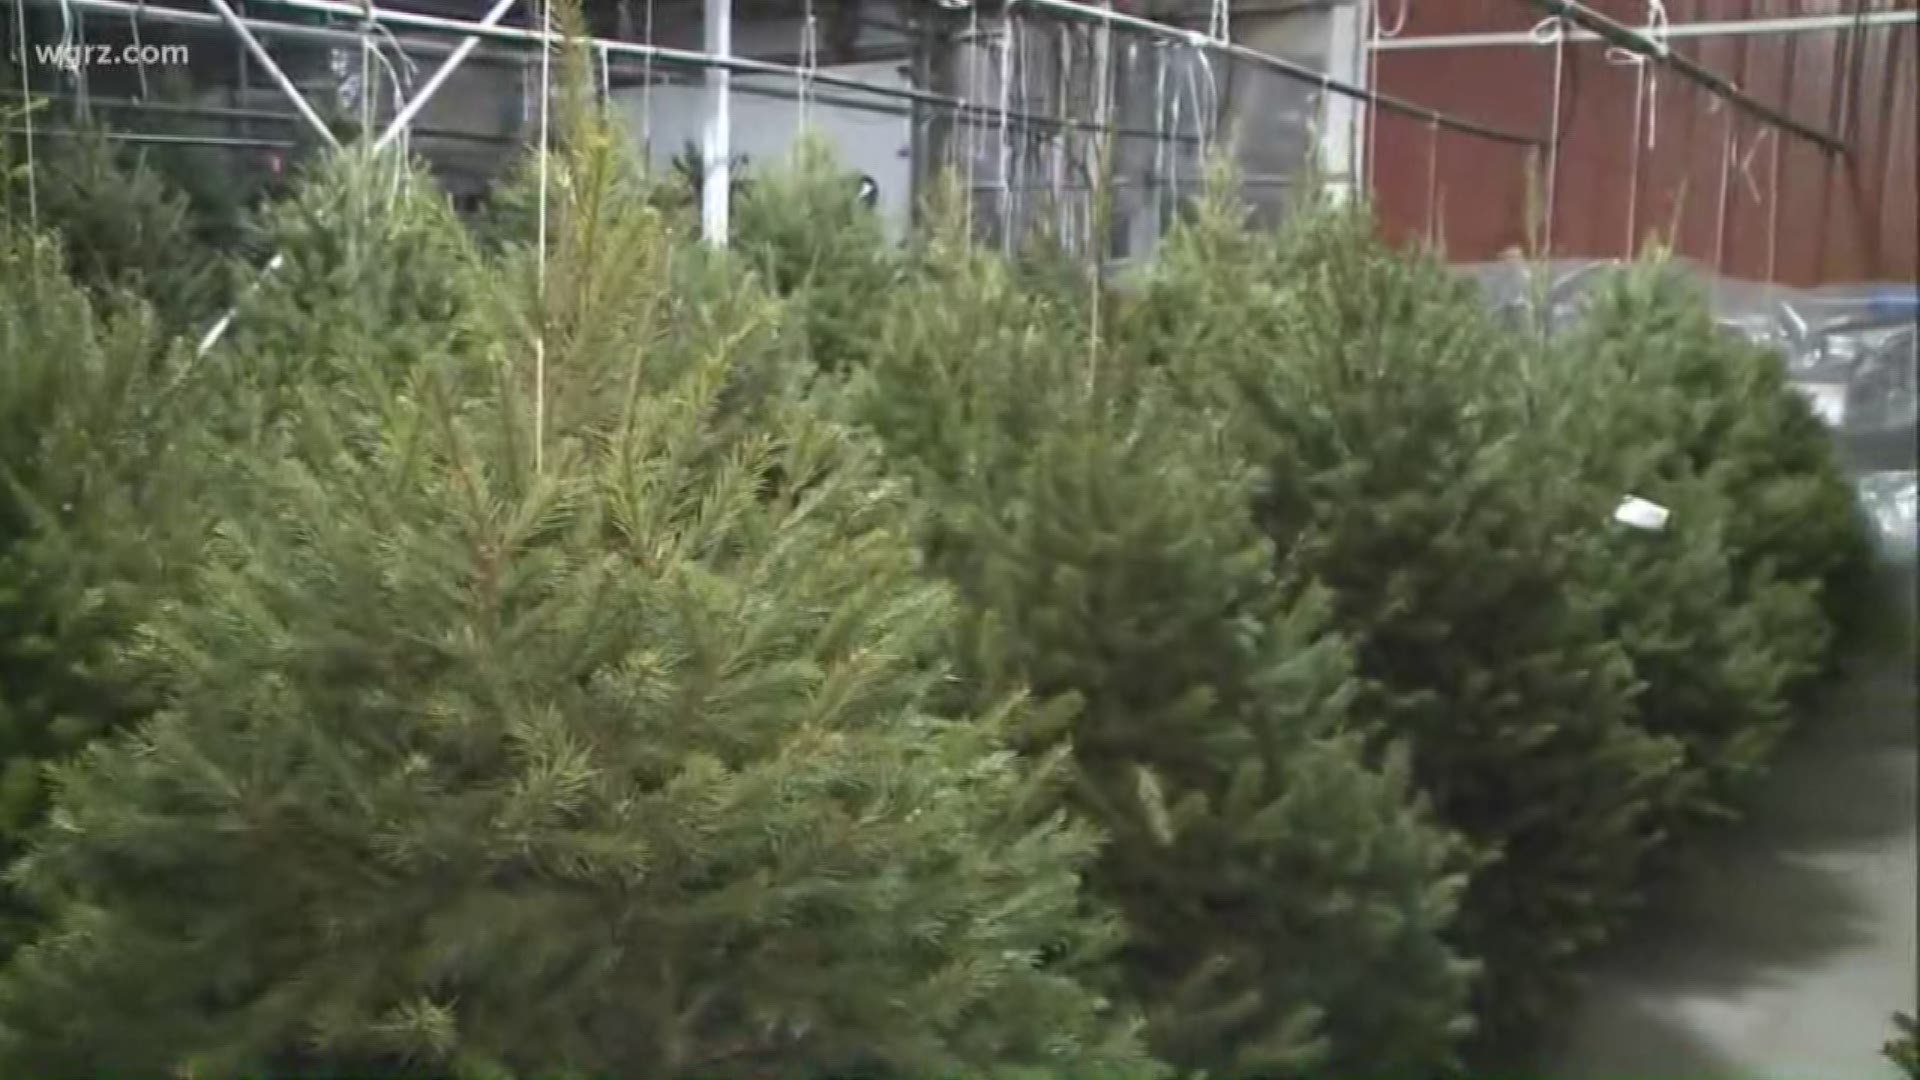 East Amherst farm market says Saturday was their busiest day for Christmas tree sales ever